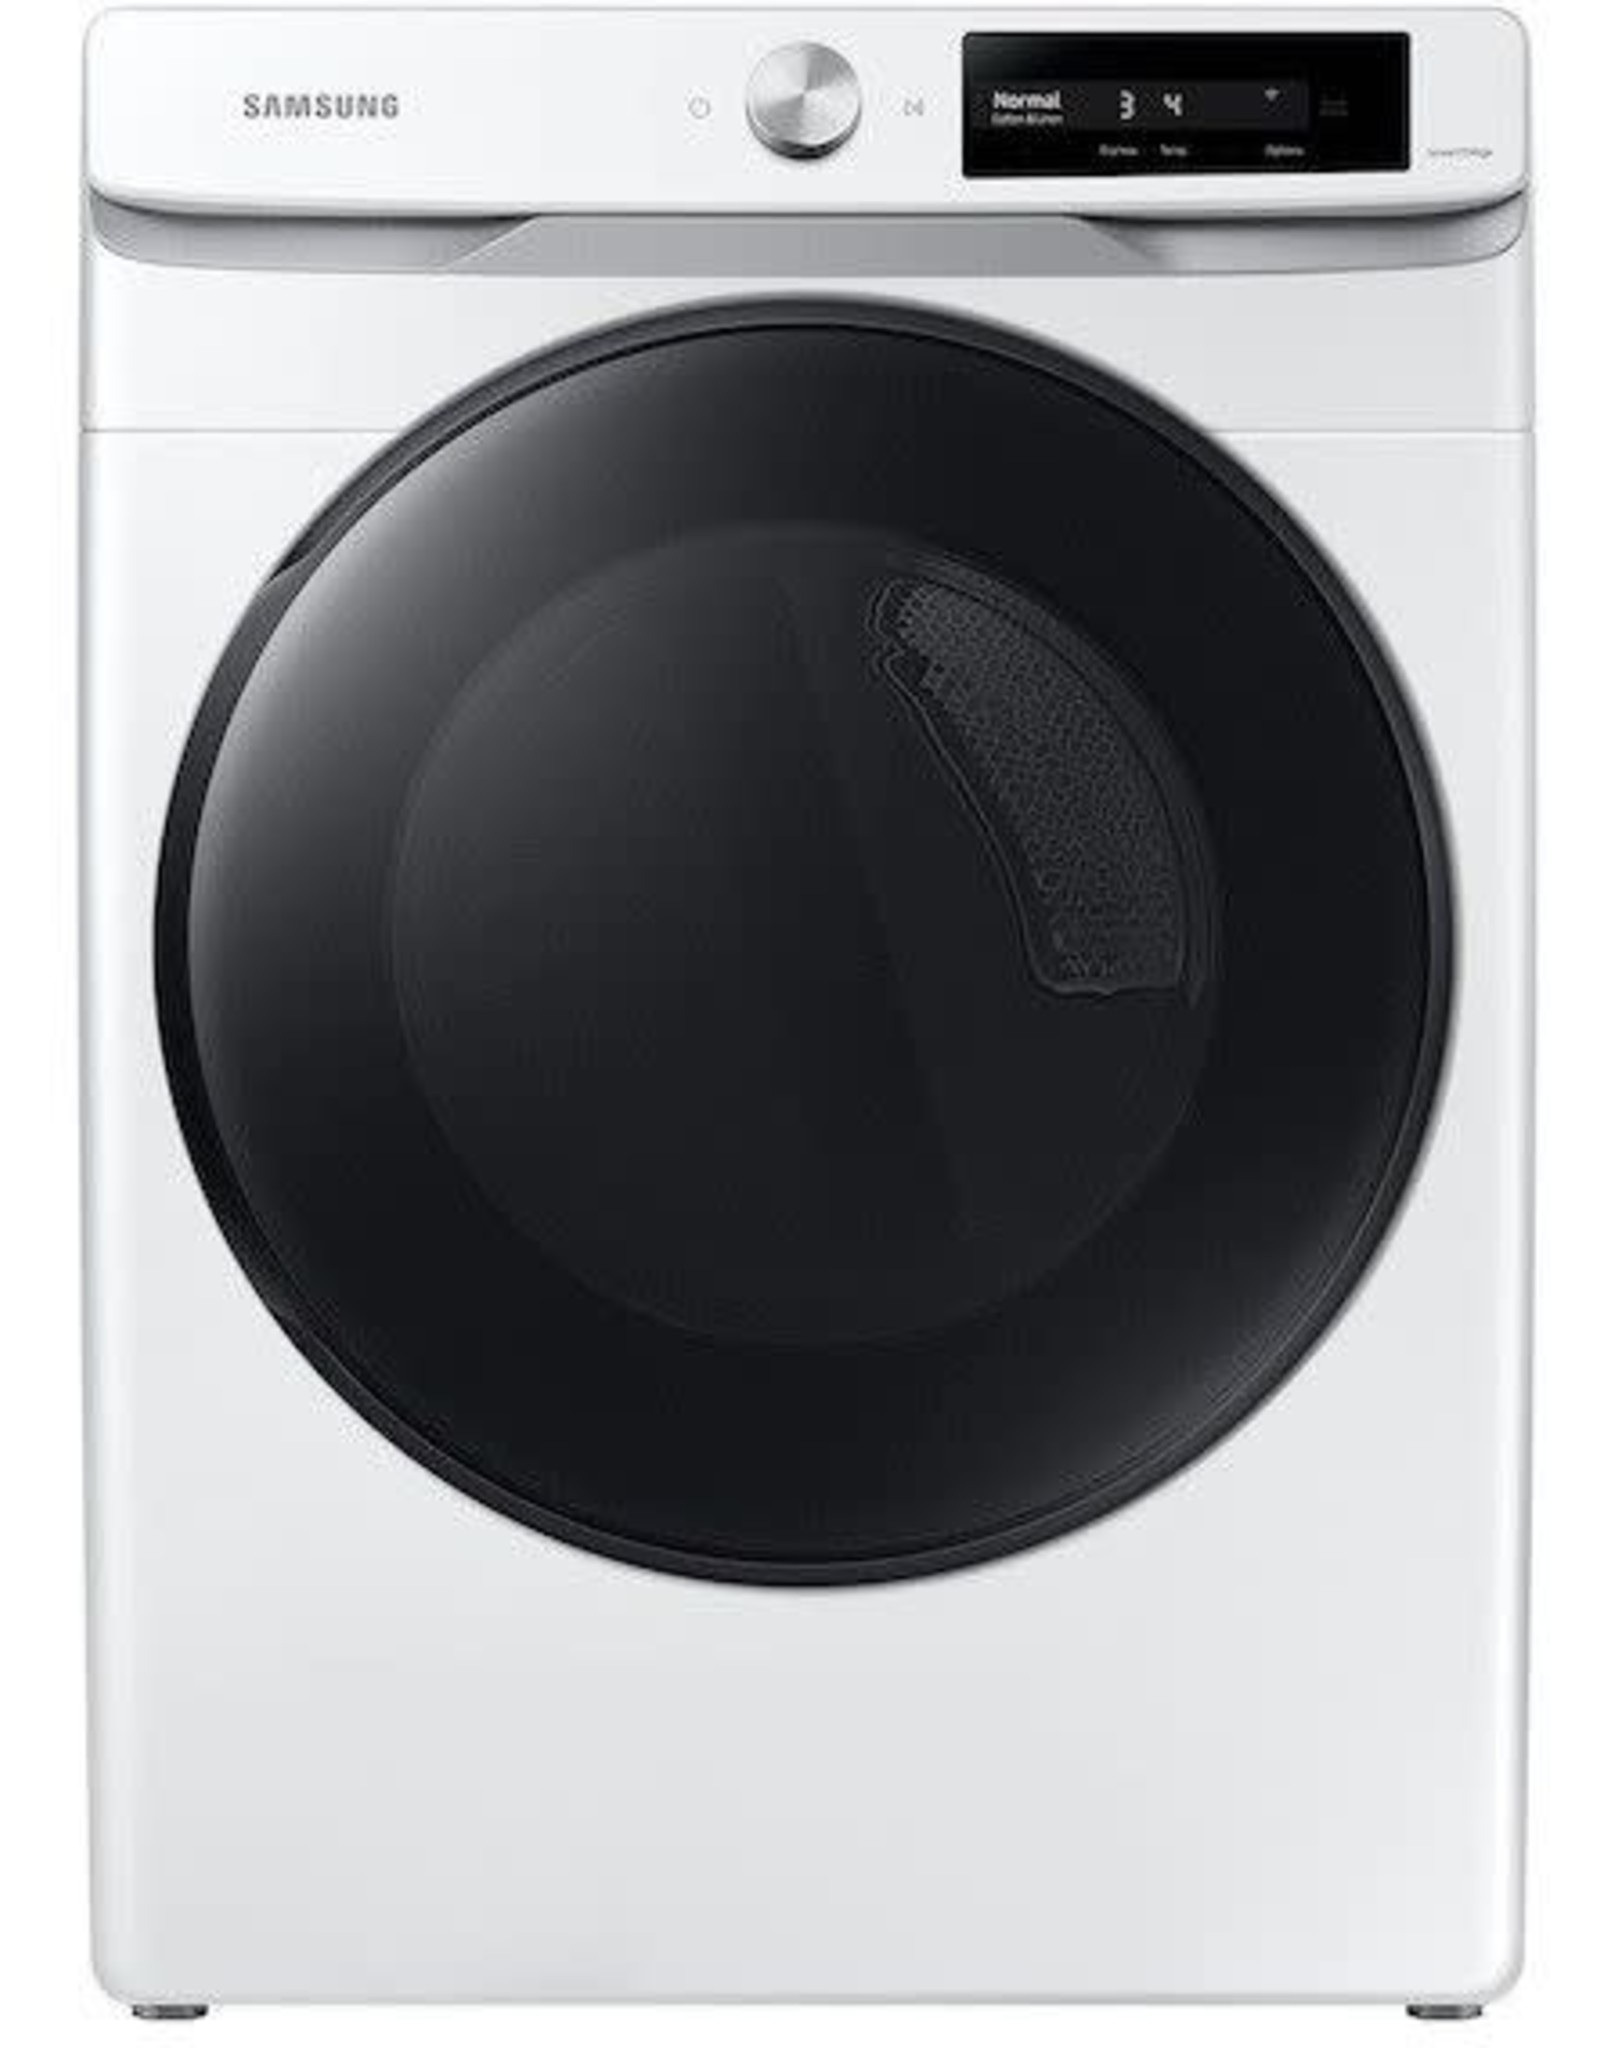 NEW DVE45A6400W 7.5 cu. ft. Smart Dial White Electric Dryer with Super Speed Dry